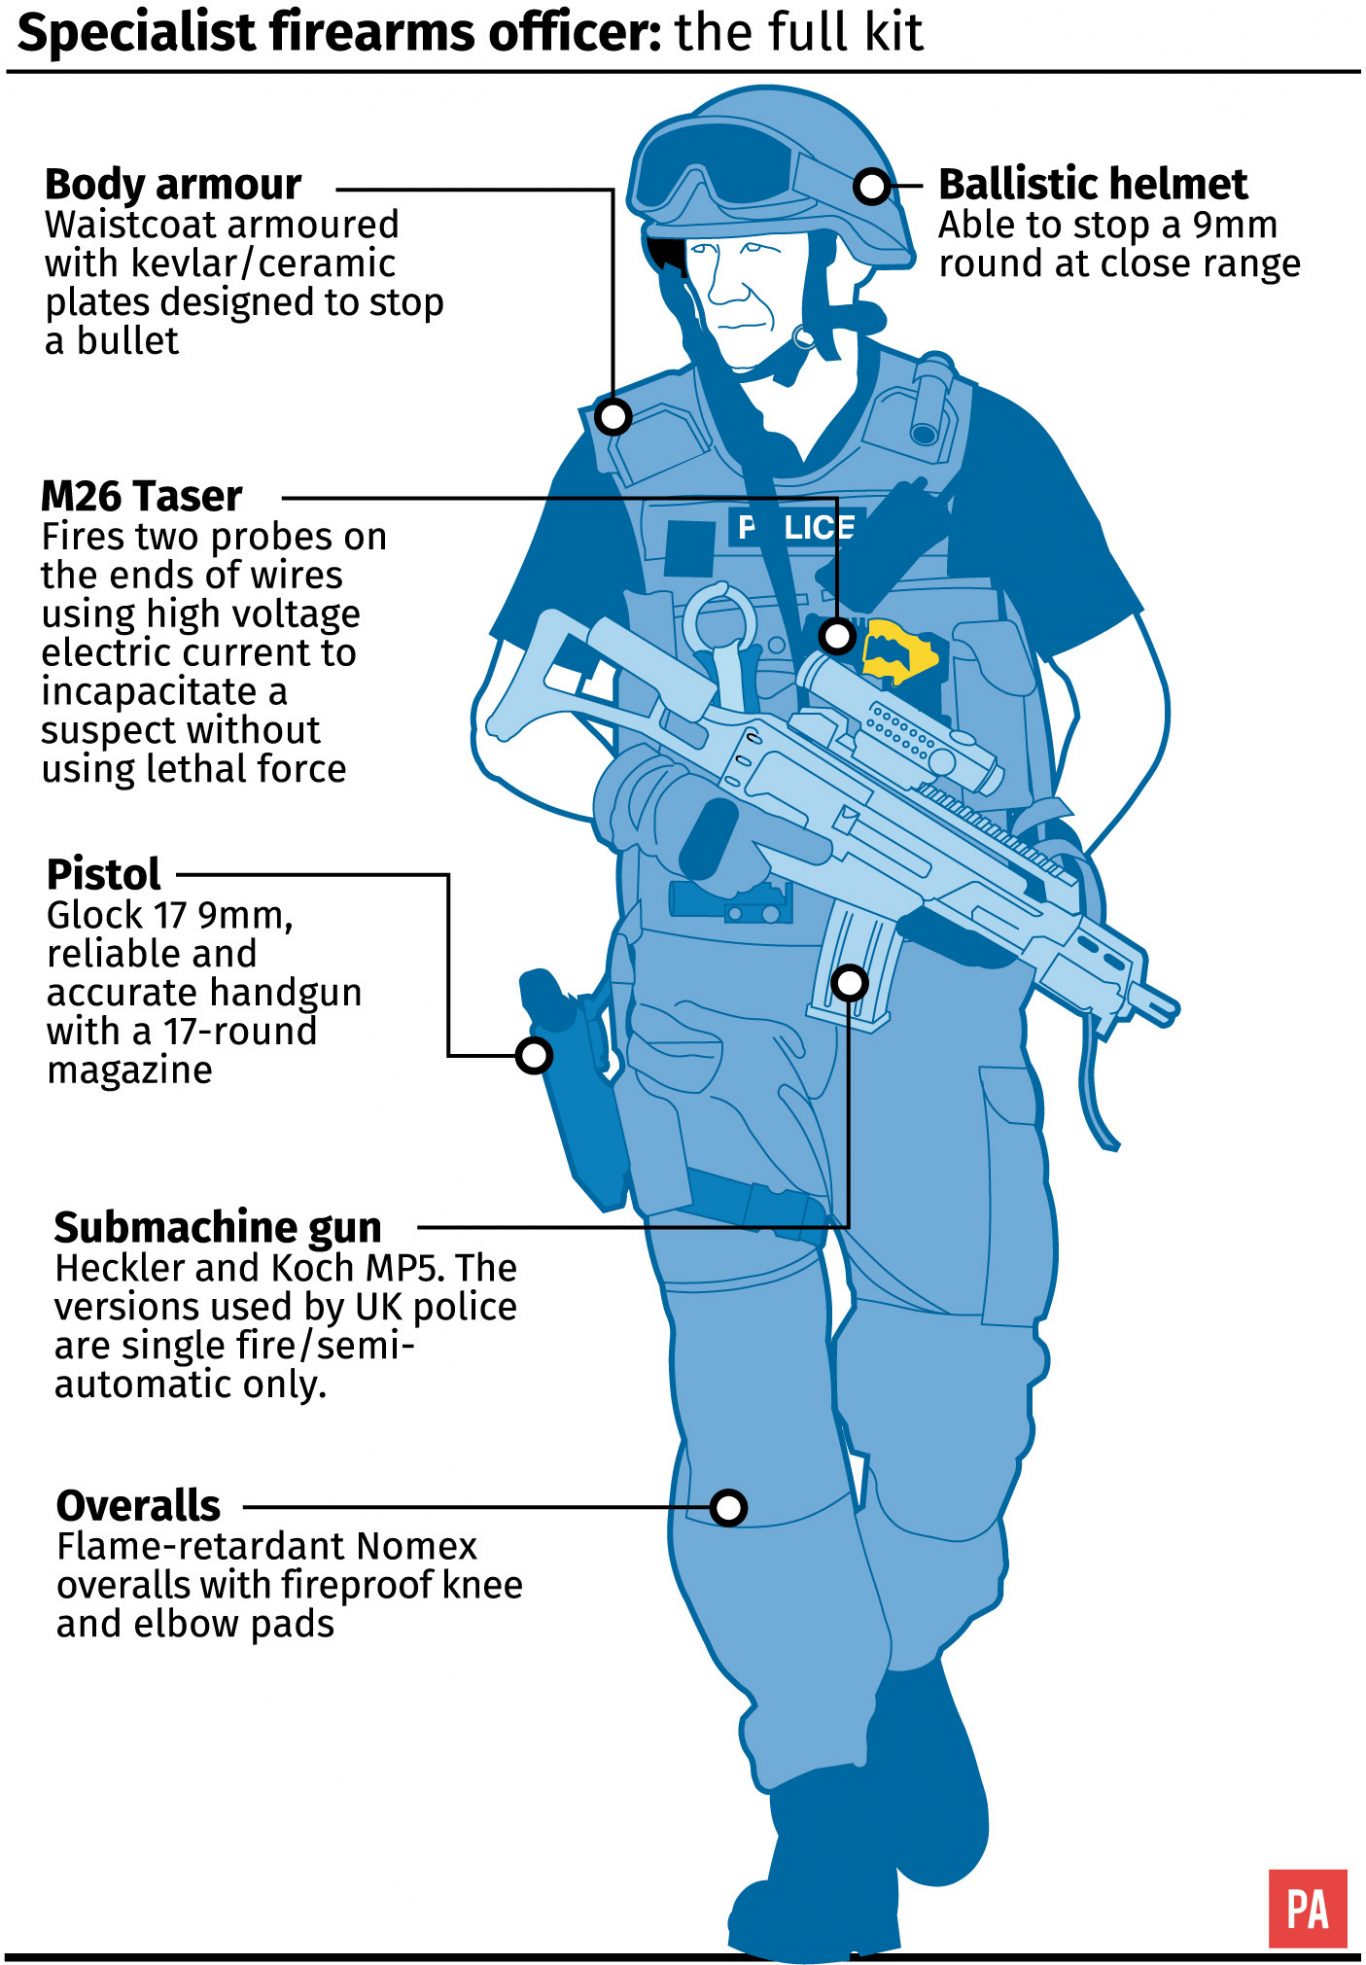 Specialist firearms officer, the full kit. 